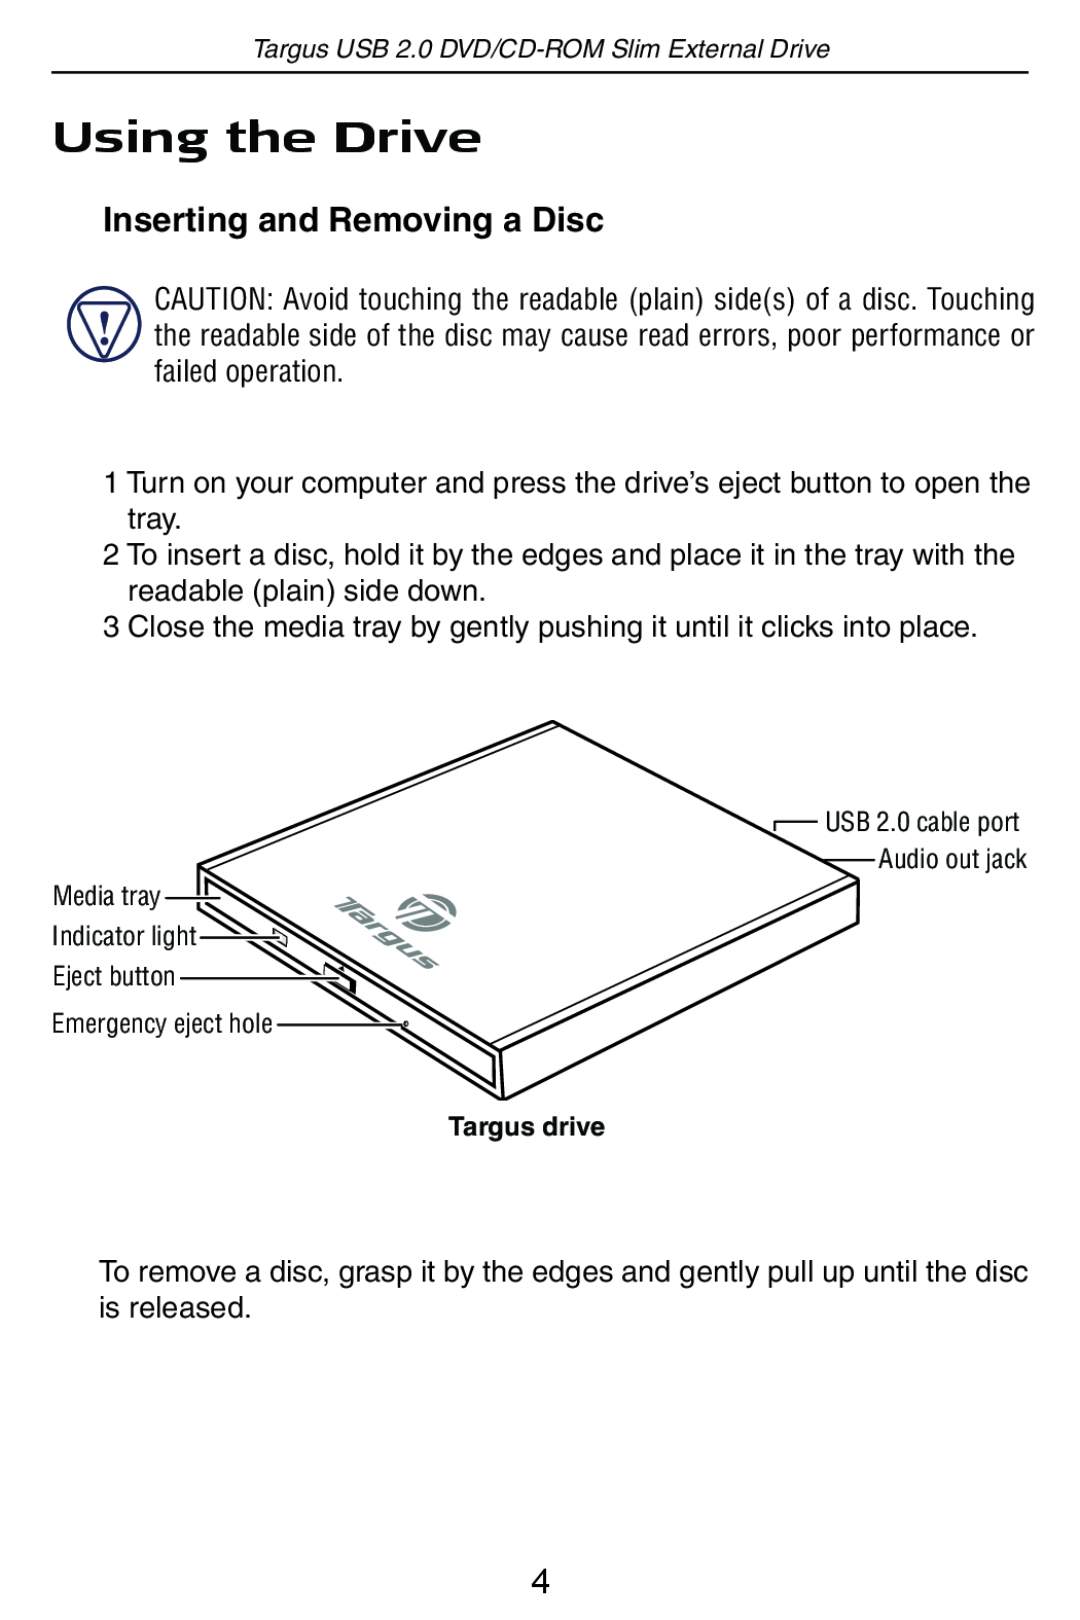 Targus USB 2.0 DVD/CD-ROM Slim External Drive specifications Using the Drive, Inserting and Removing a Disc 